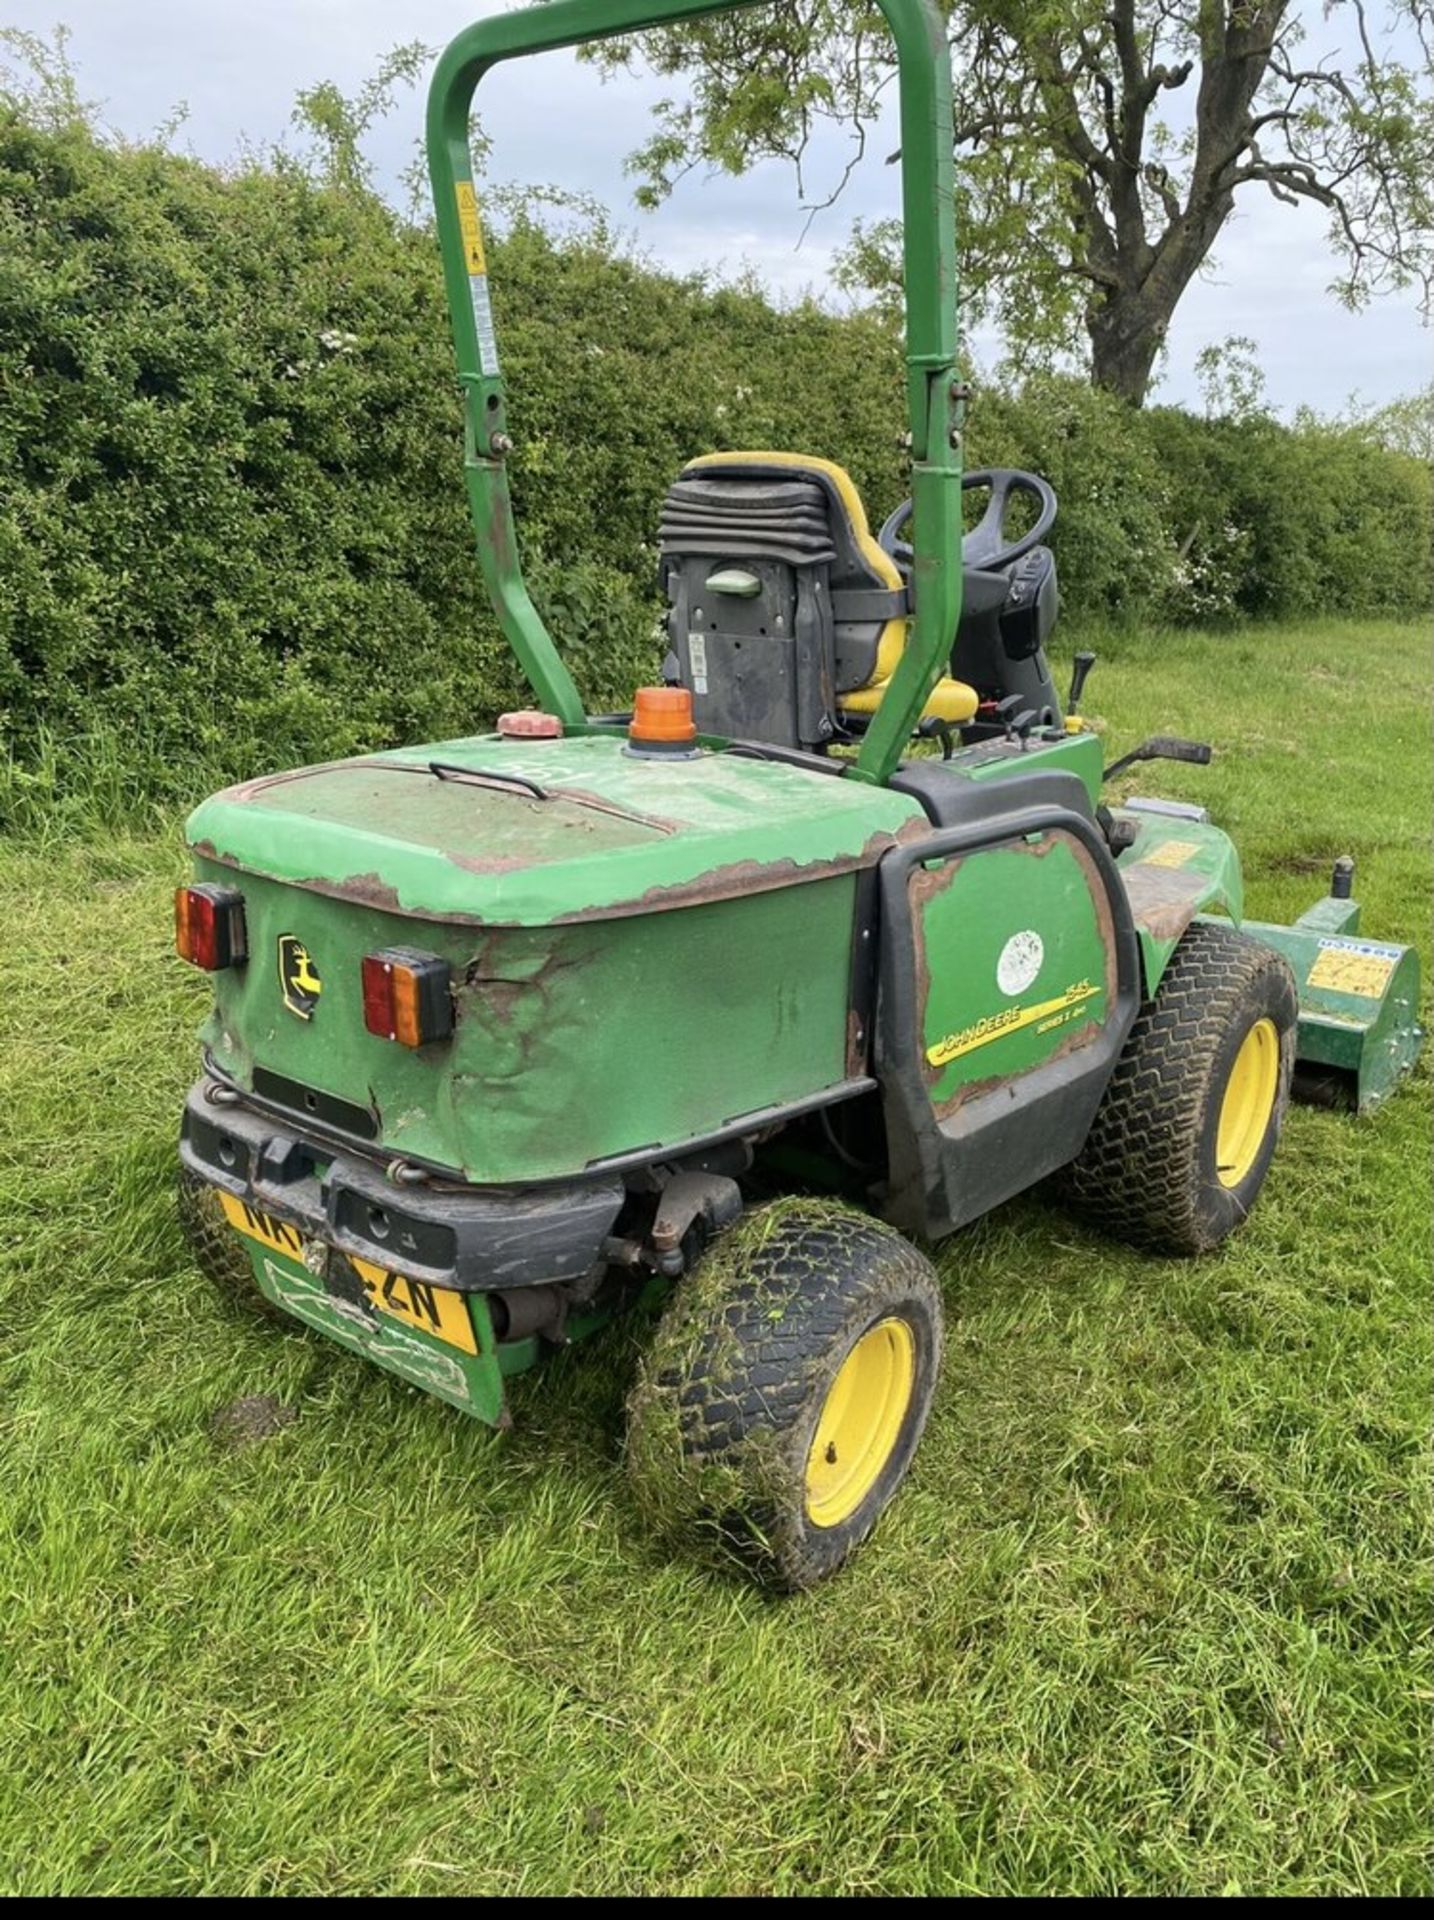 2012 JOHN DEERE OUTFRONT FLAIL MOWER LOCATION NORTH YORKSHIRE.